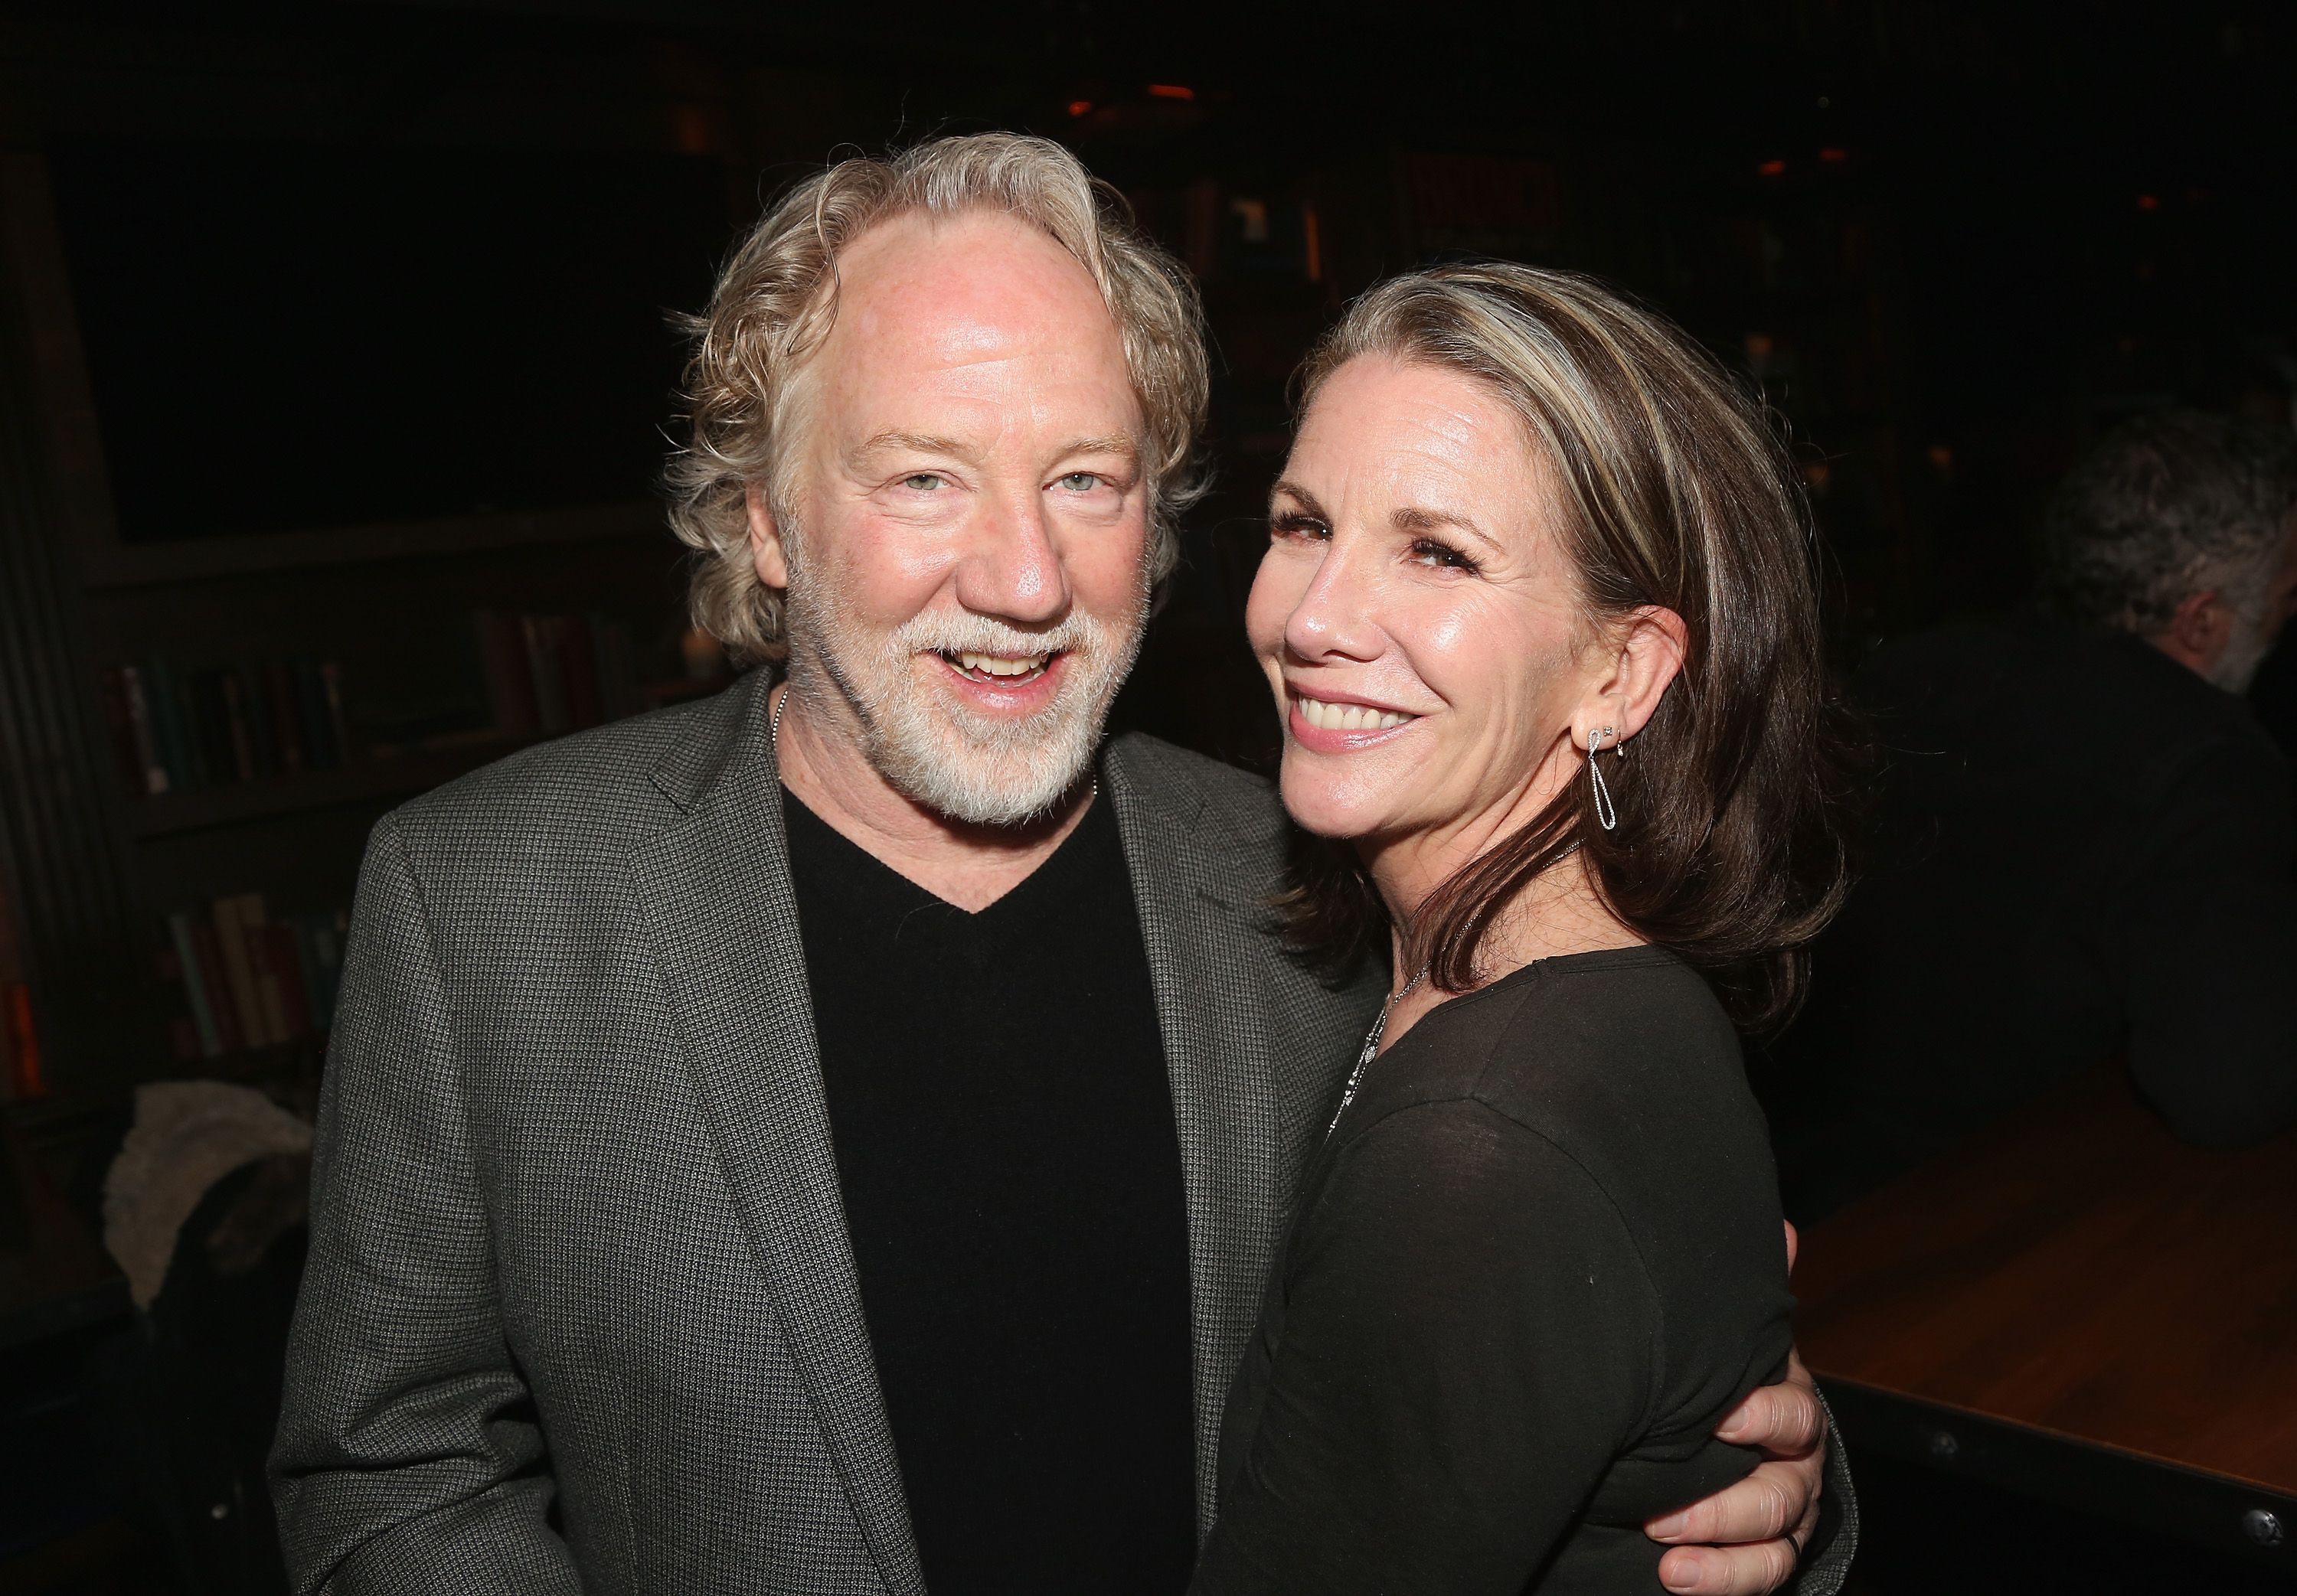 Timothy Busfield and Melissa Gilbert at the opening night after-party for "The Seafarer" on April 18, 2018, in New York City | Photo: Bruce Glikas/Getty Images